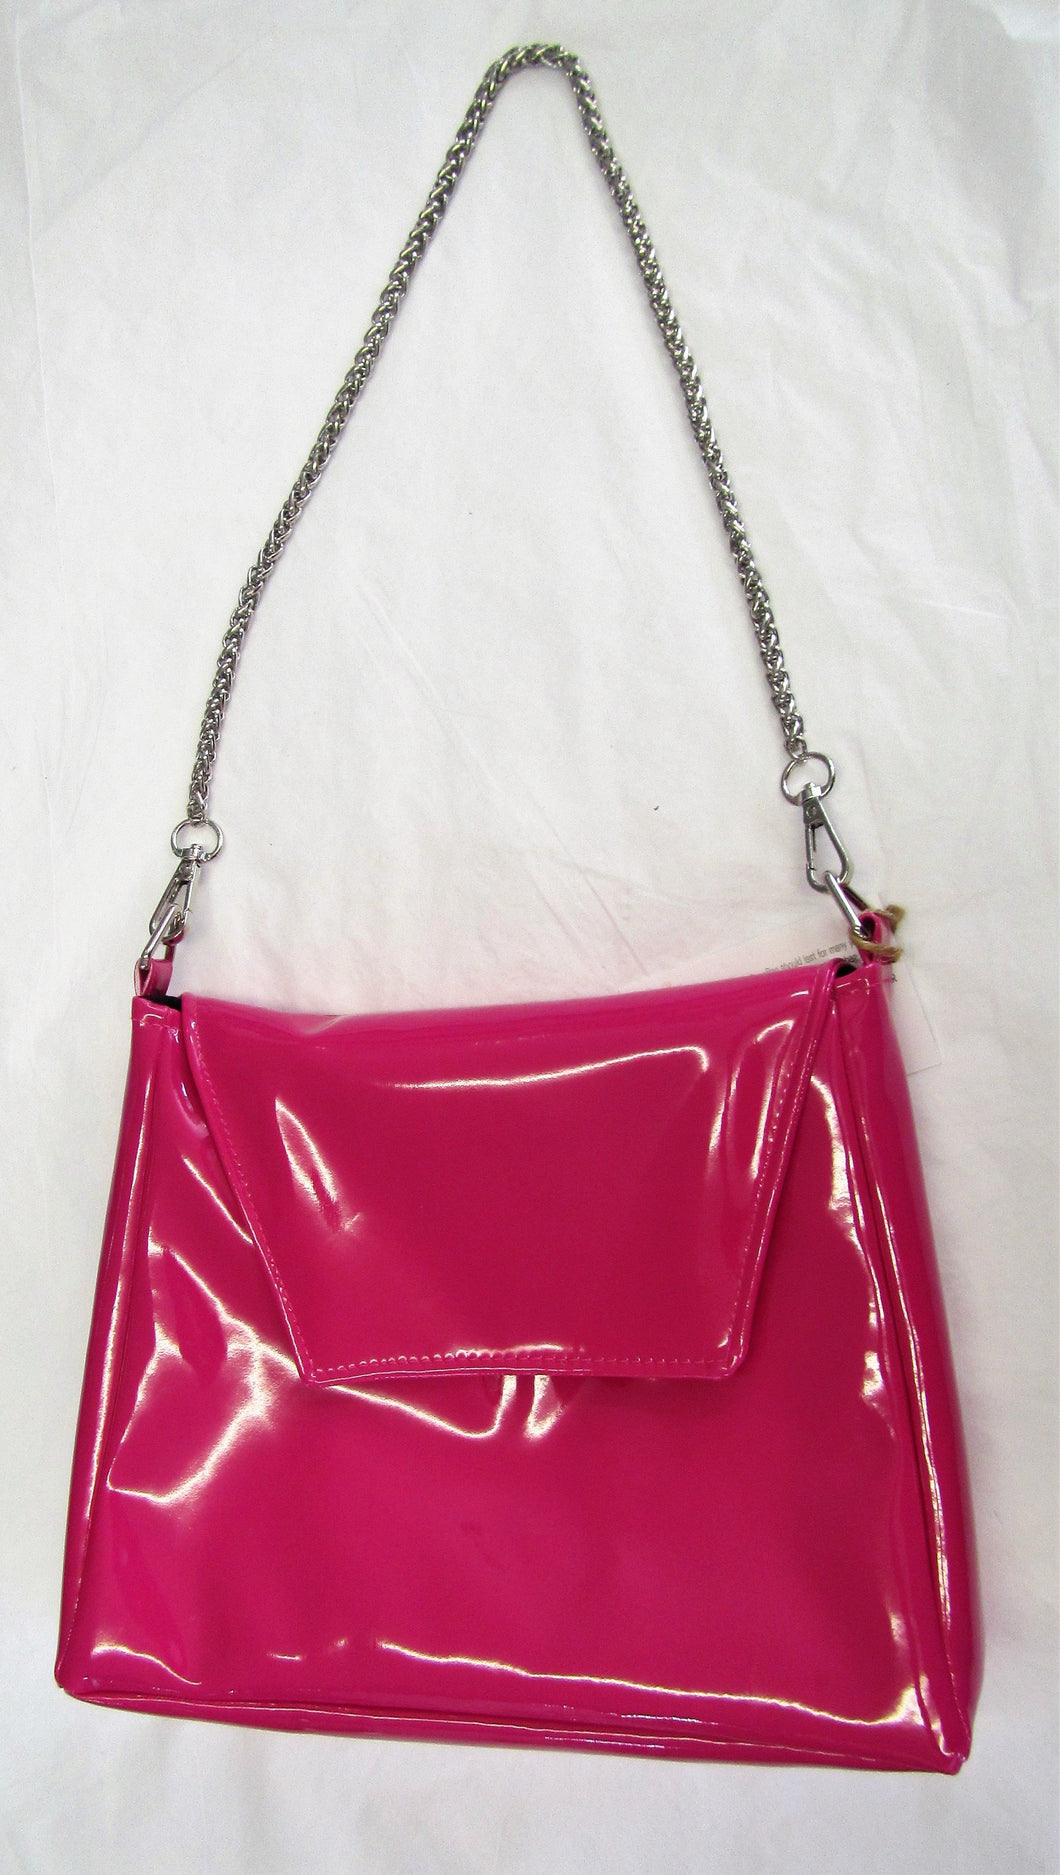 Beautiful handcrafted patent pink handbag with silver chain handle